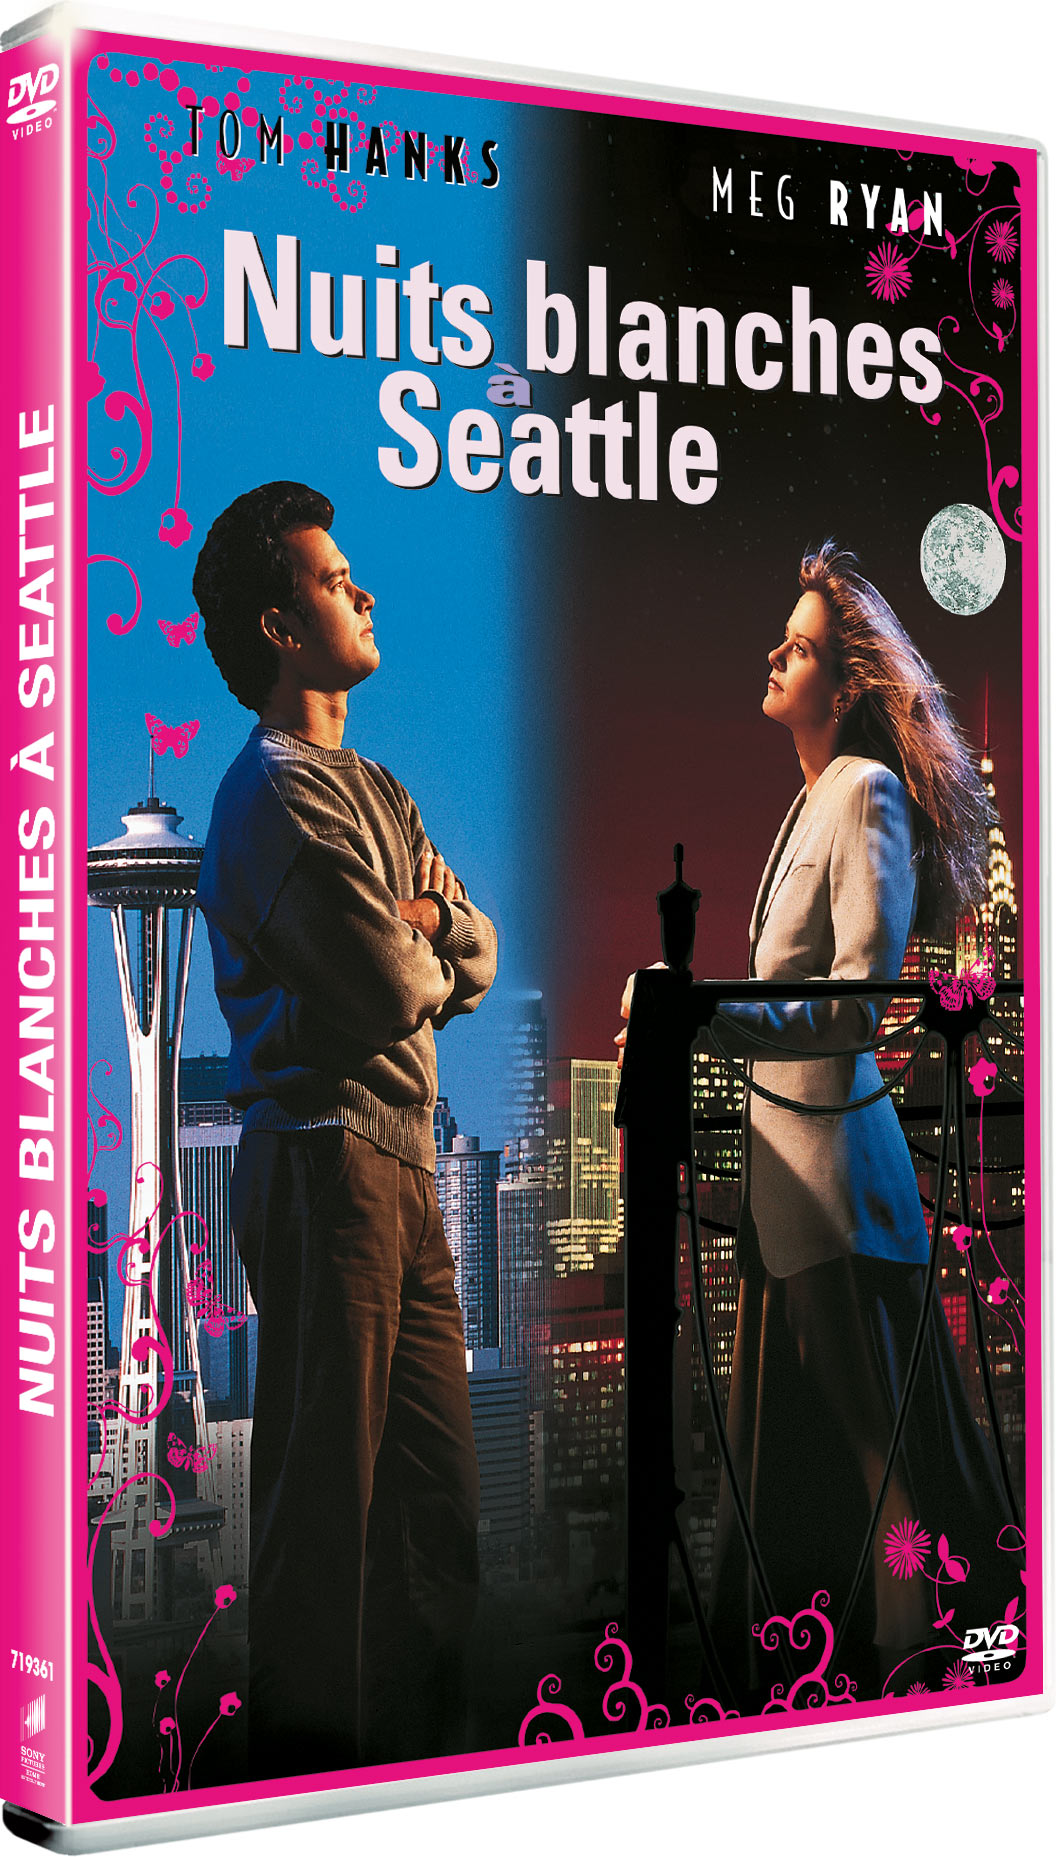 NUITS BLANCHES A SEATTLE - DVD